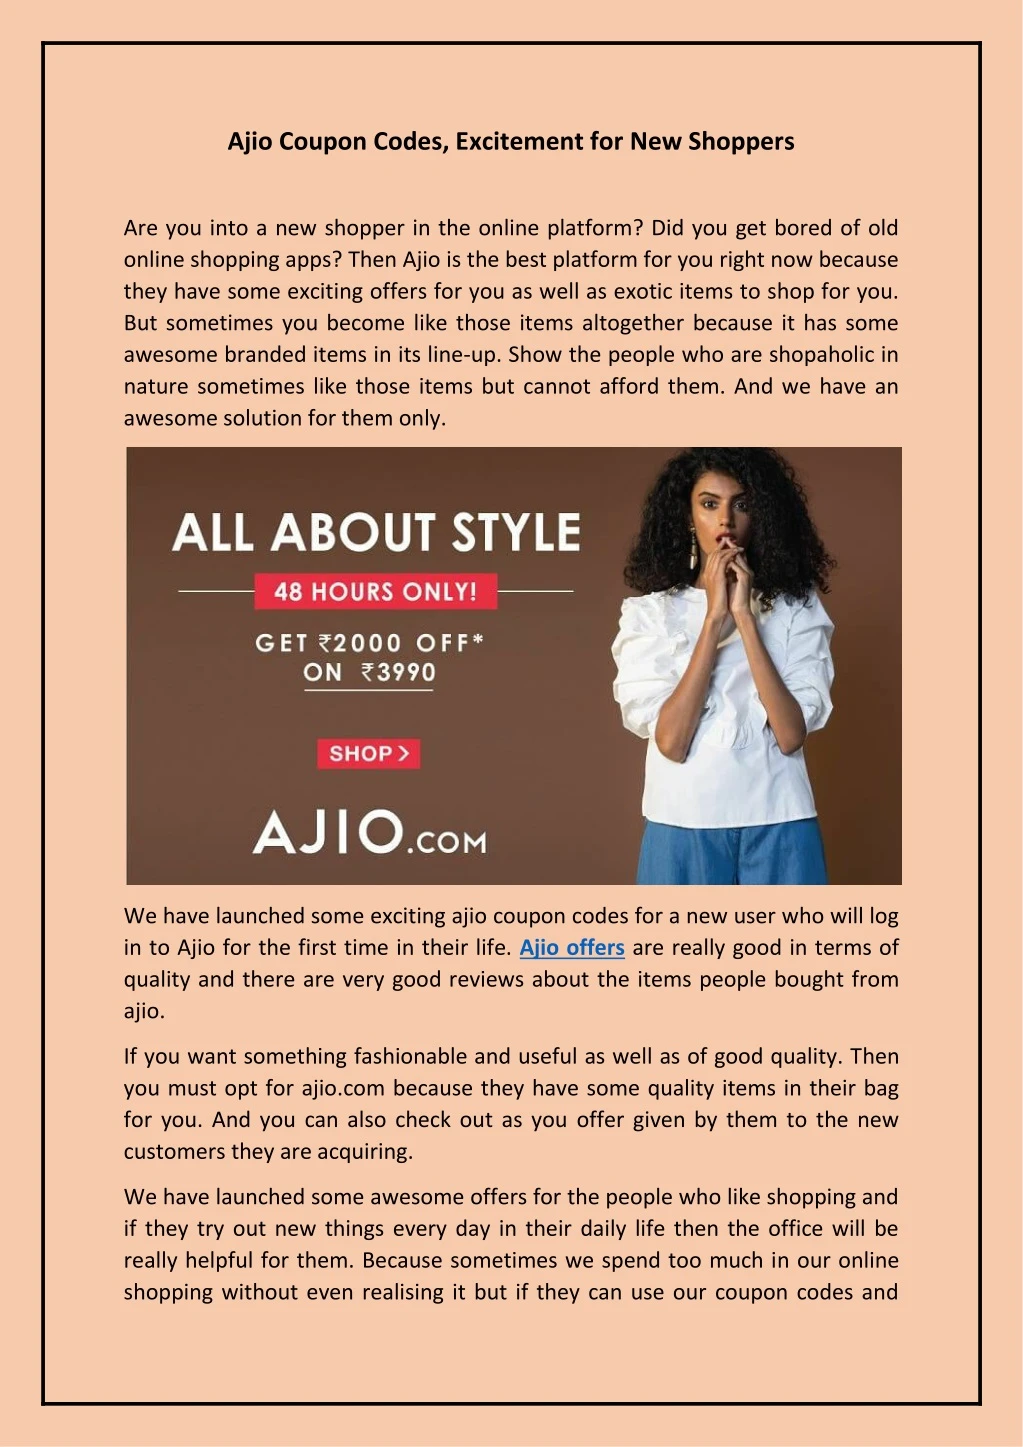 ajio coupon codes excitement for new shoppers